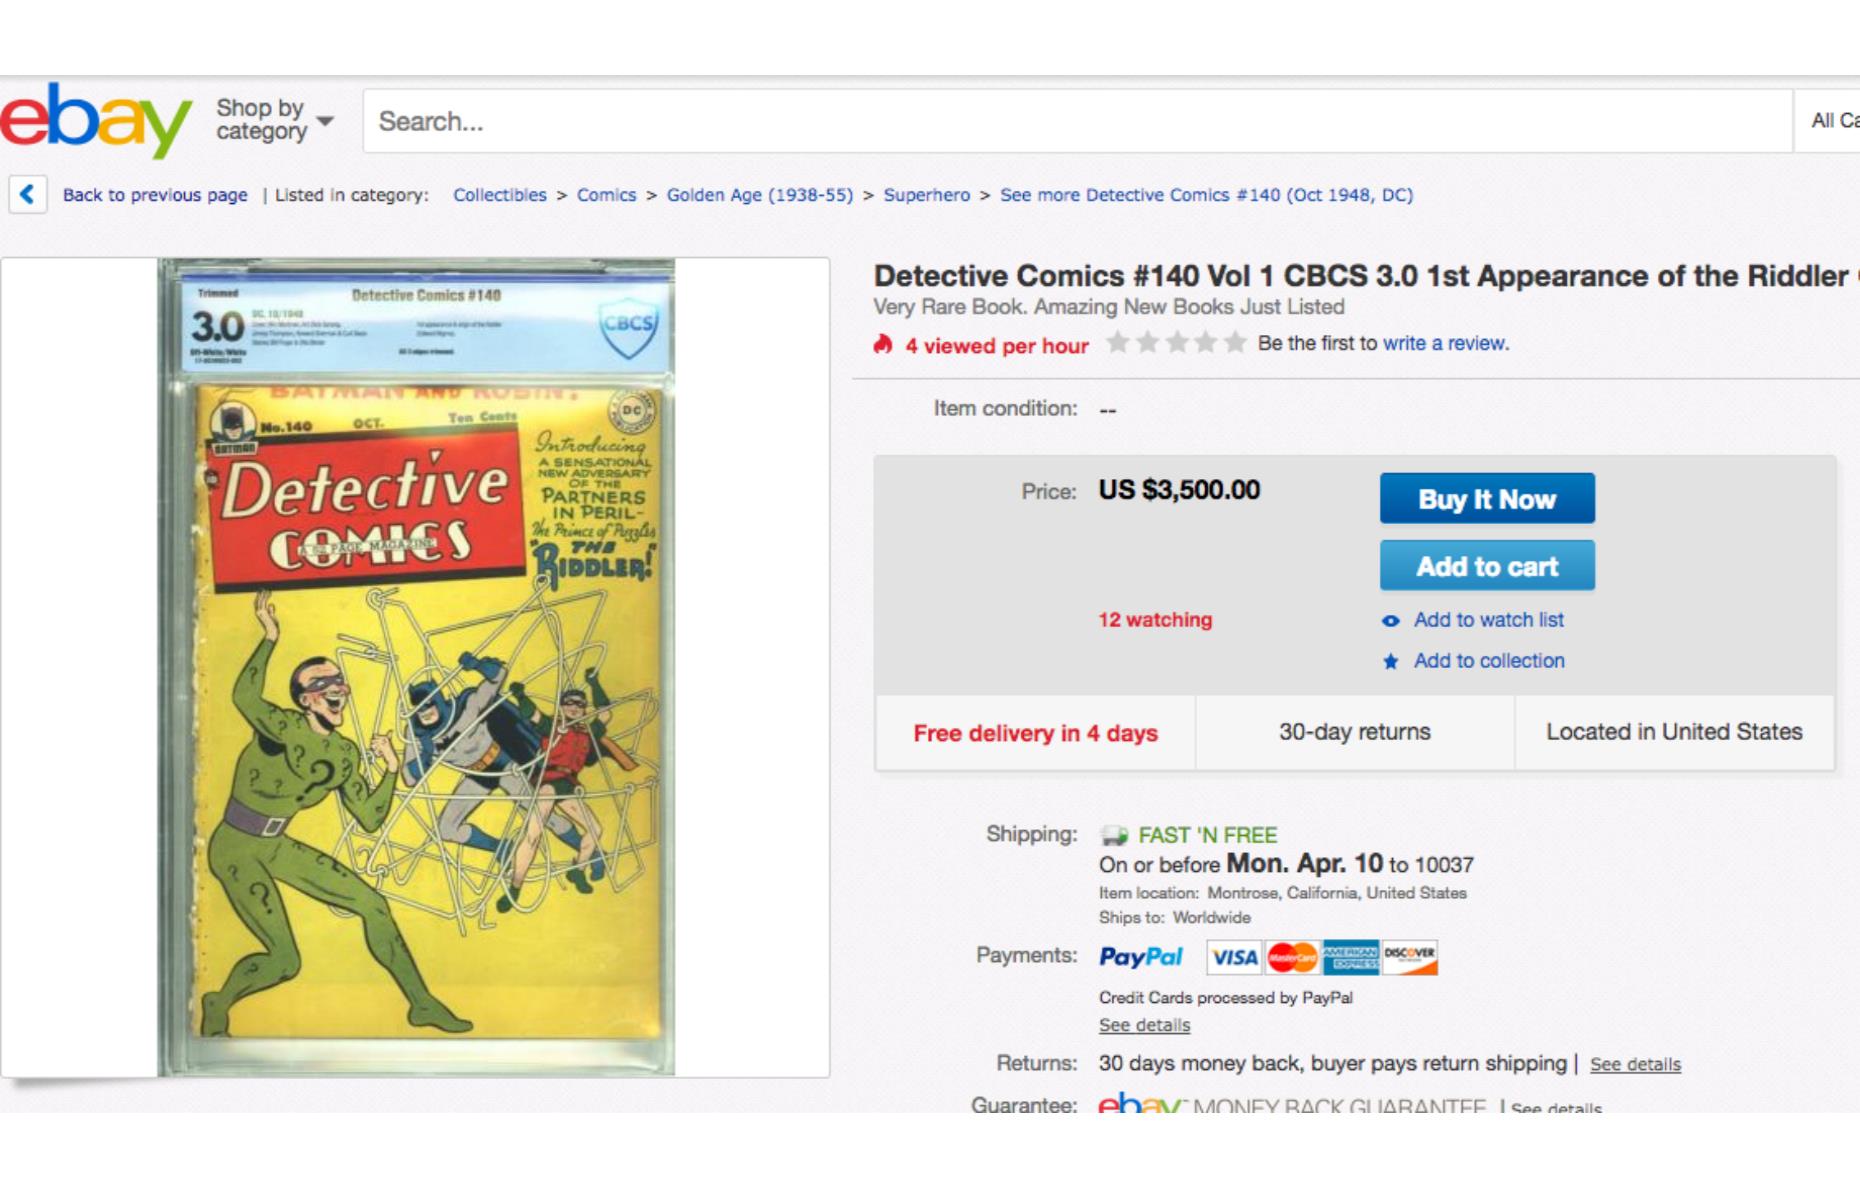 Rare Detective Comics featuring the Riddler's first appearance: $3,500 (£2.8k)